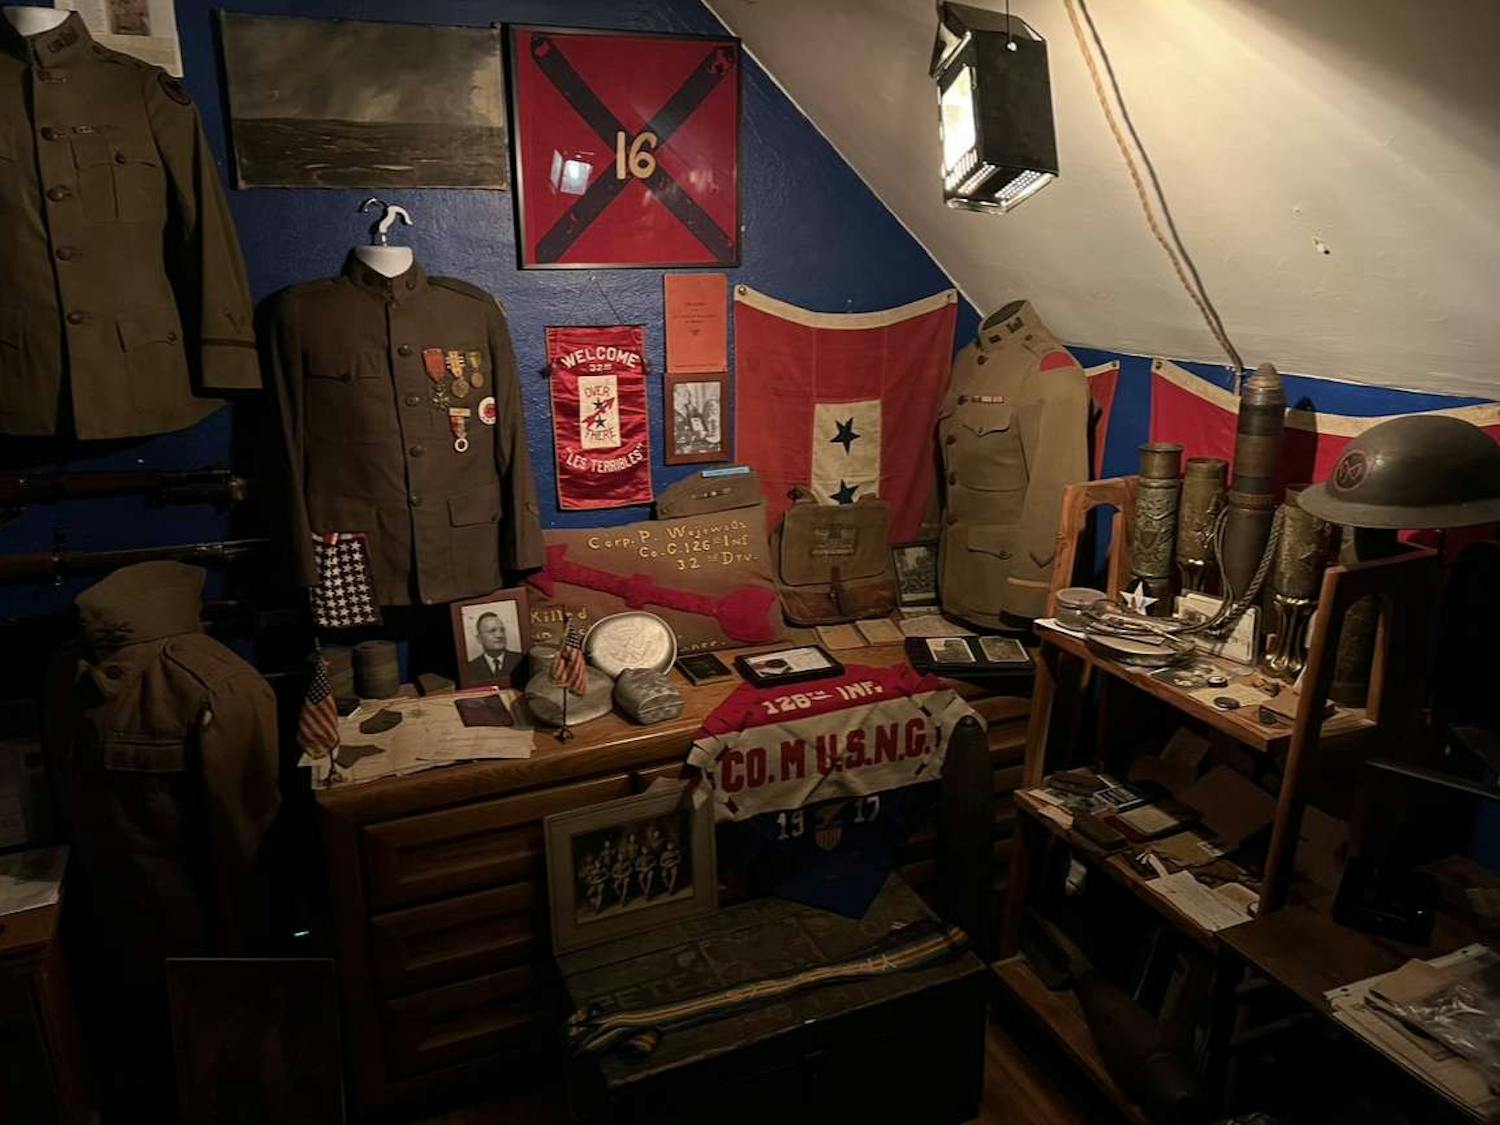 Michael Santoro has been collecting WWI memorabilia since he received a propaganda poster for Christmas in 2016.